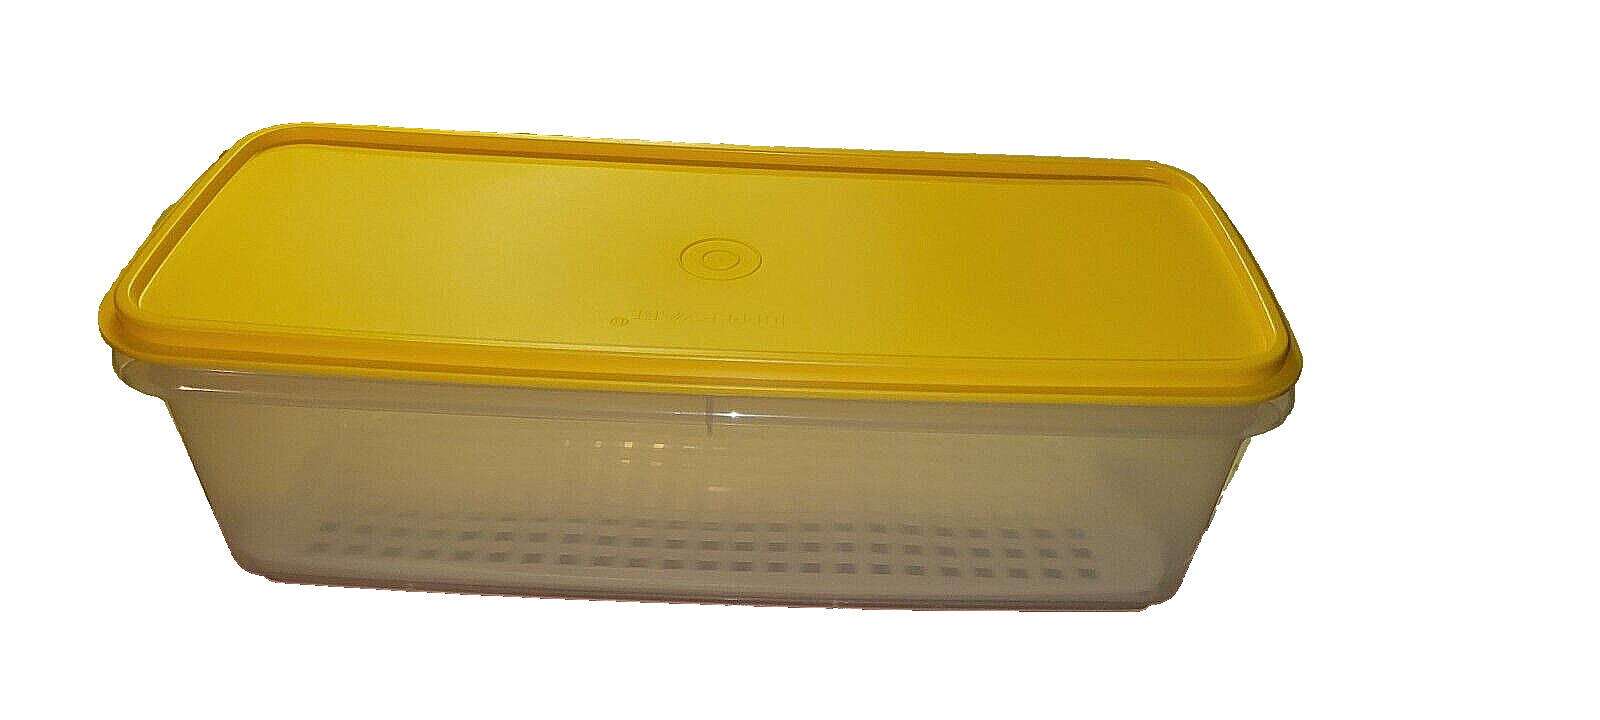 Tupperware 782 Bread /Celery Keeper White With Yellow Lid And White Insert 14.5”